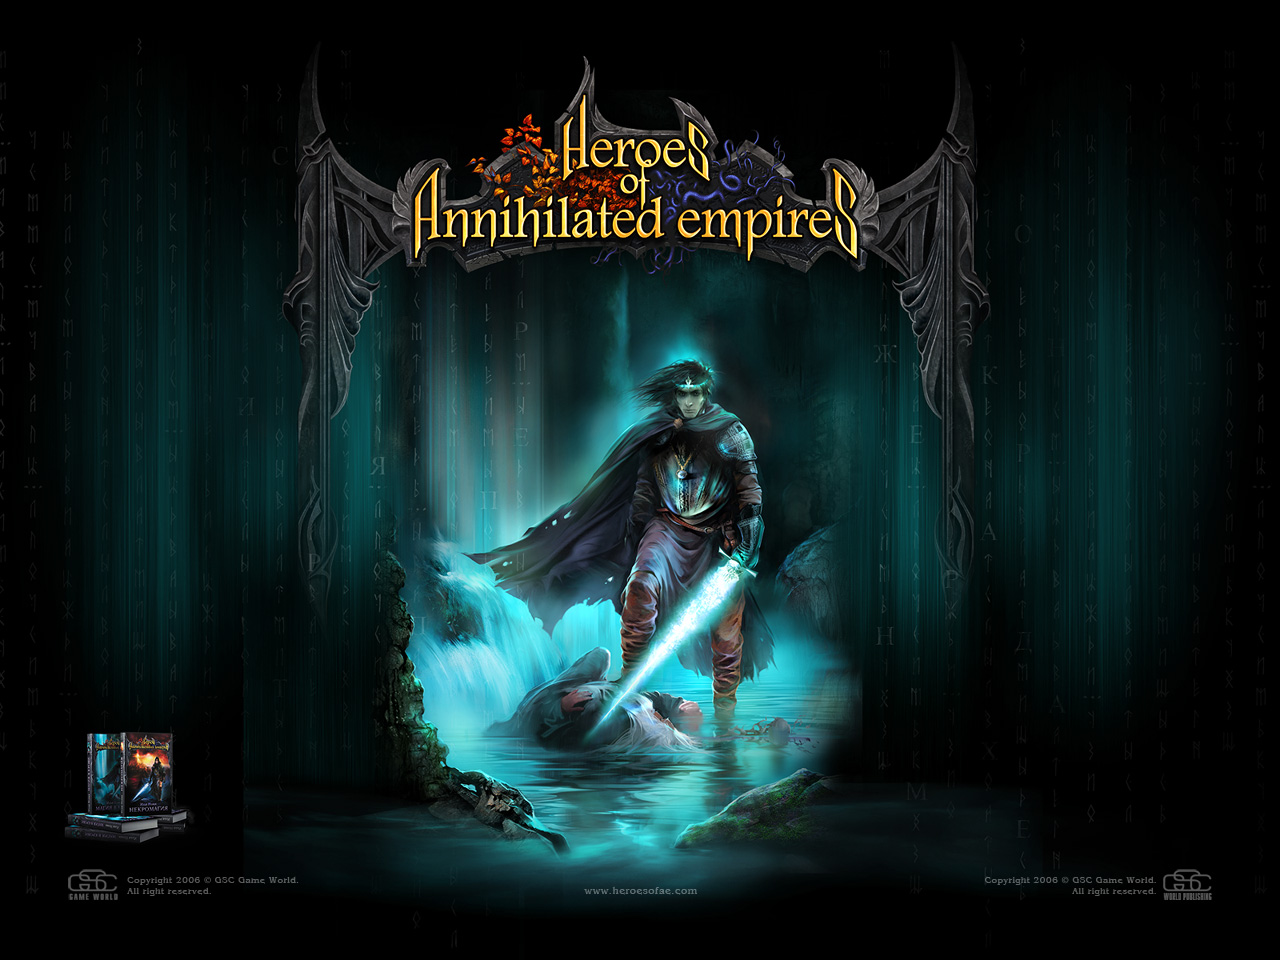 Heroes_of_annihilated_empires_01_1280x960.jpg